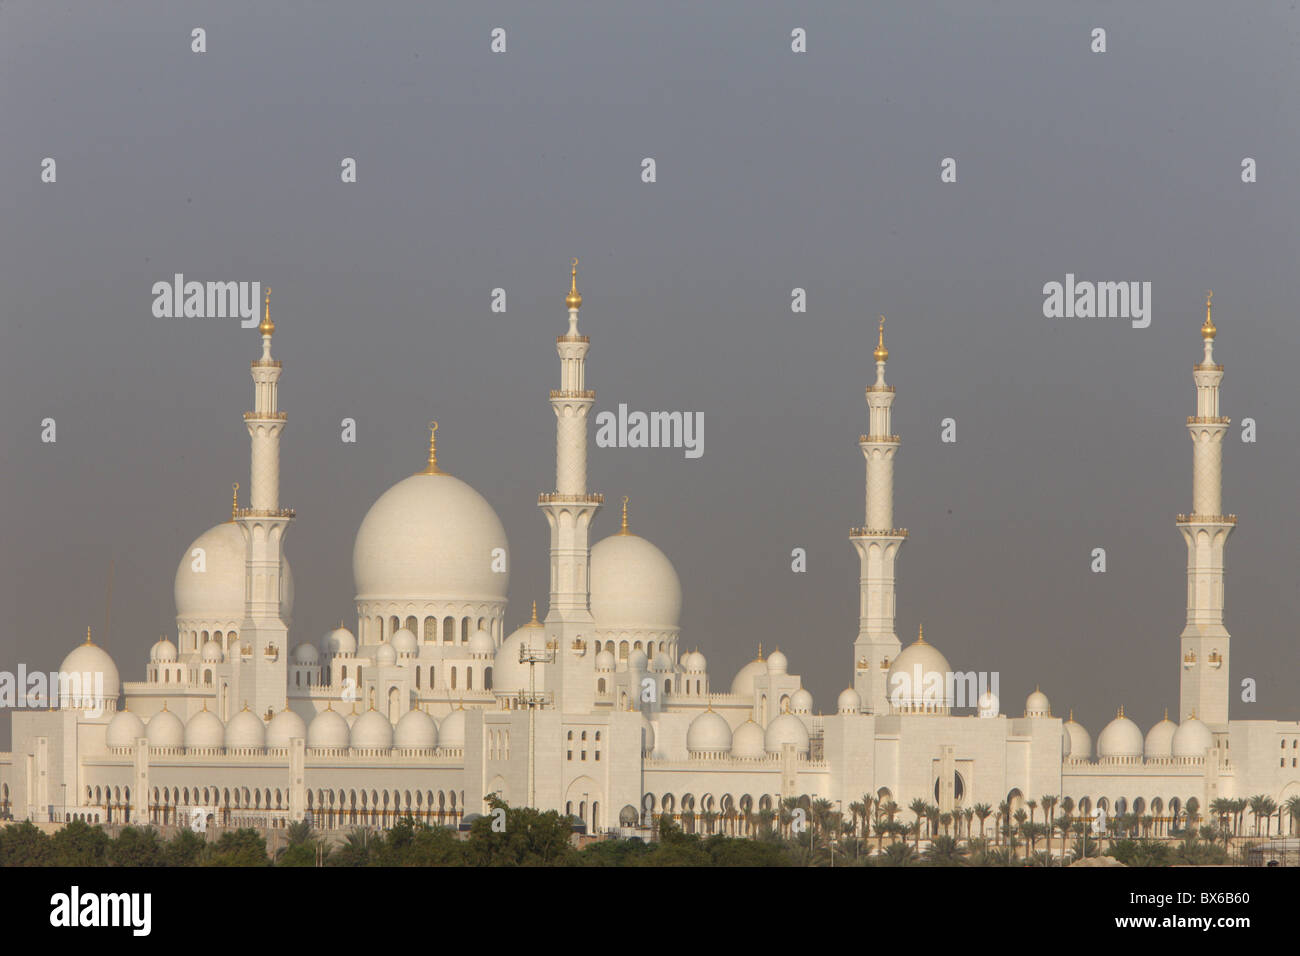 Sheikh Zayed Grand Mosque, the biggest mosque in the U.A.E. and one of the 10 largest mosques in the world, Abu Dhabi, UAE Stock Photo